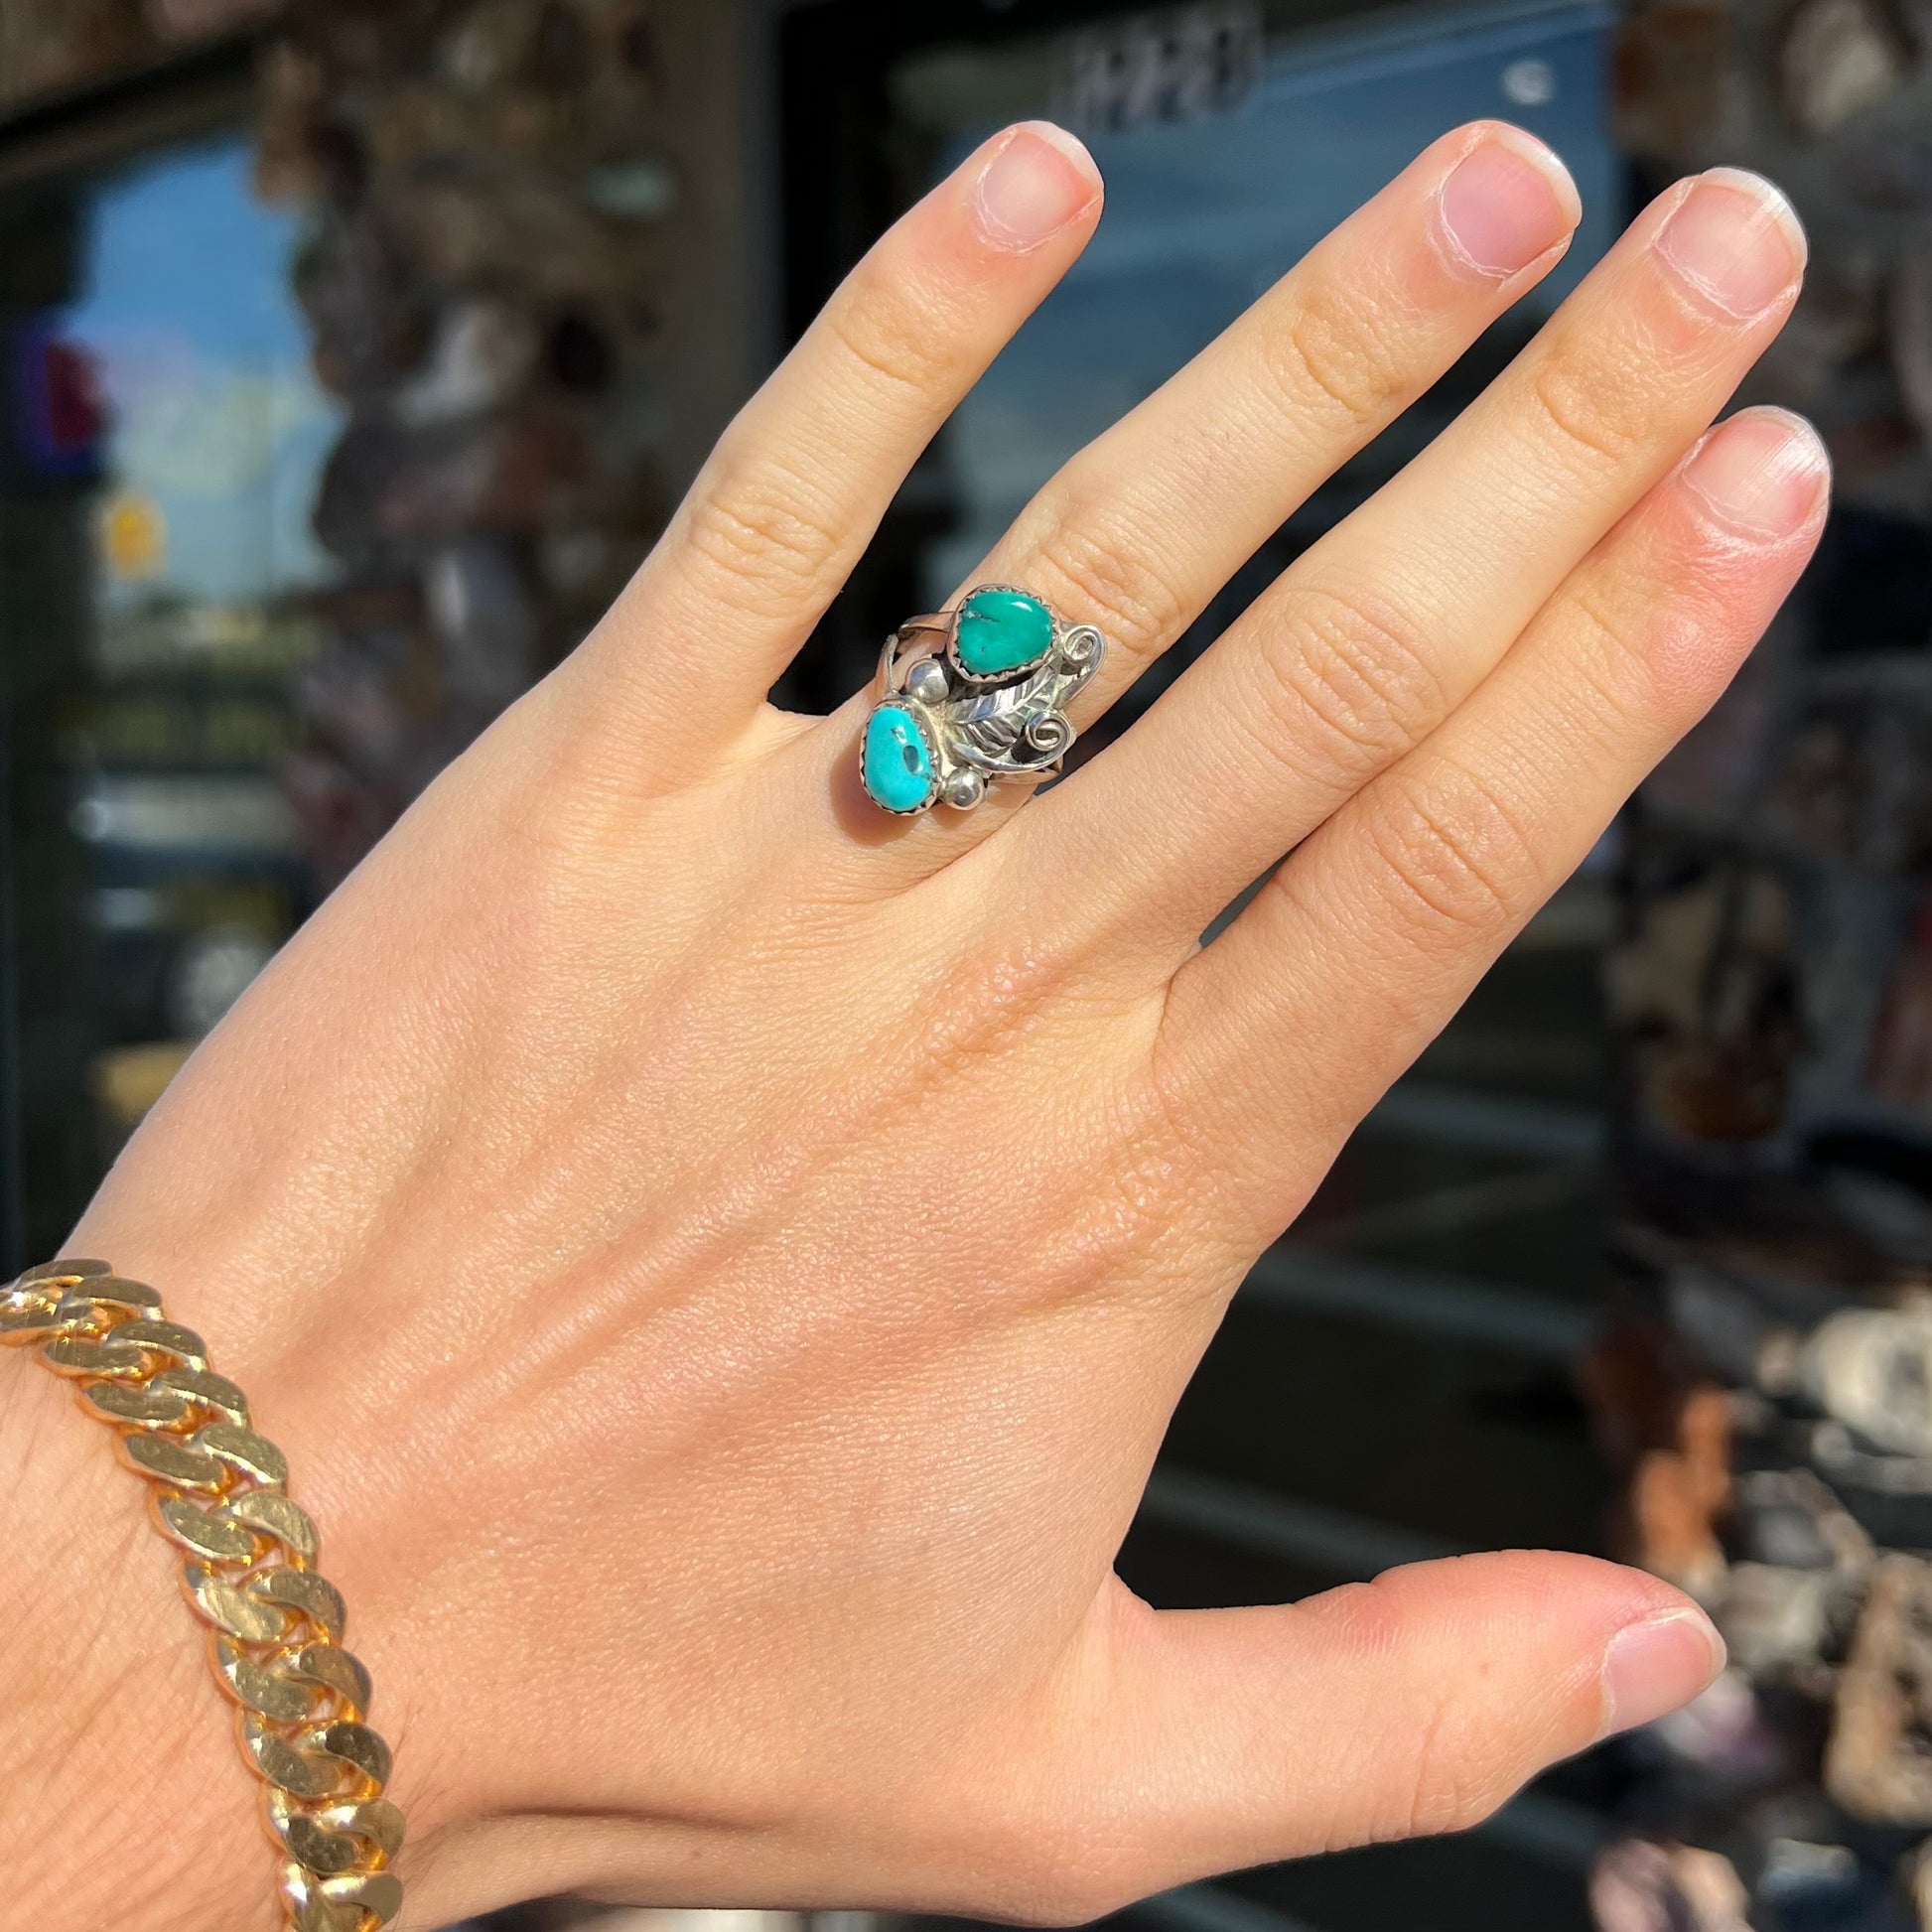 A ladies' Southwest style sterling silver ring set with Sleeping Beauty & Royston turquoise stones.